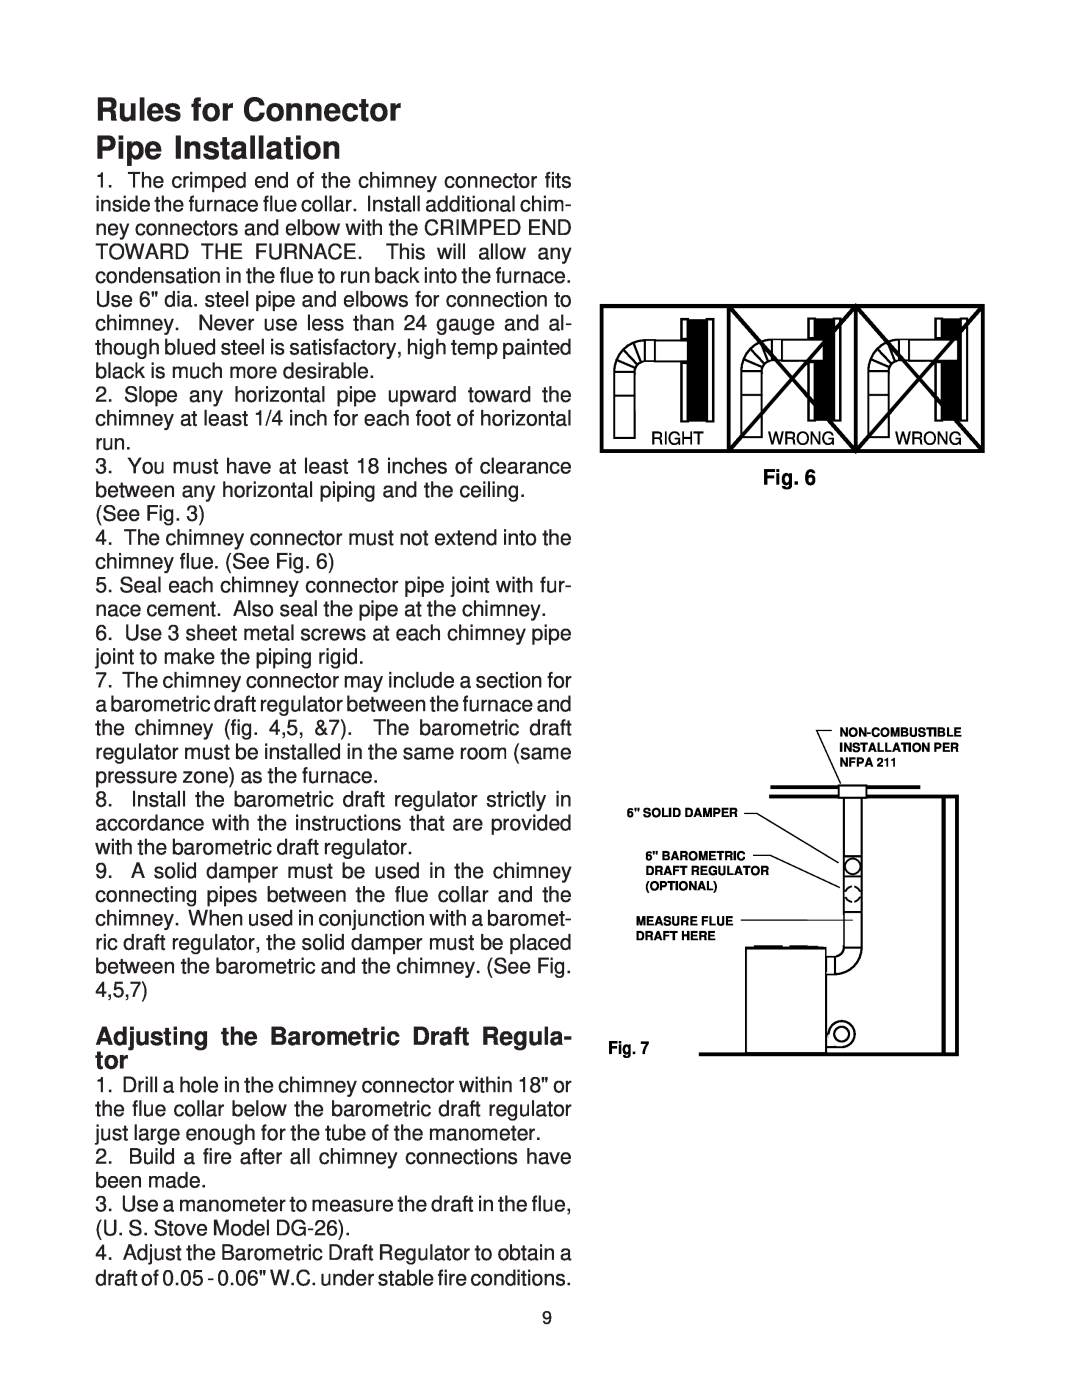 United States Stove 1321 warranty Rules for Connector Pipe Installation, Adjusting the Barometric Draft Regula- tor 